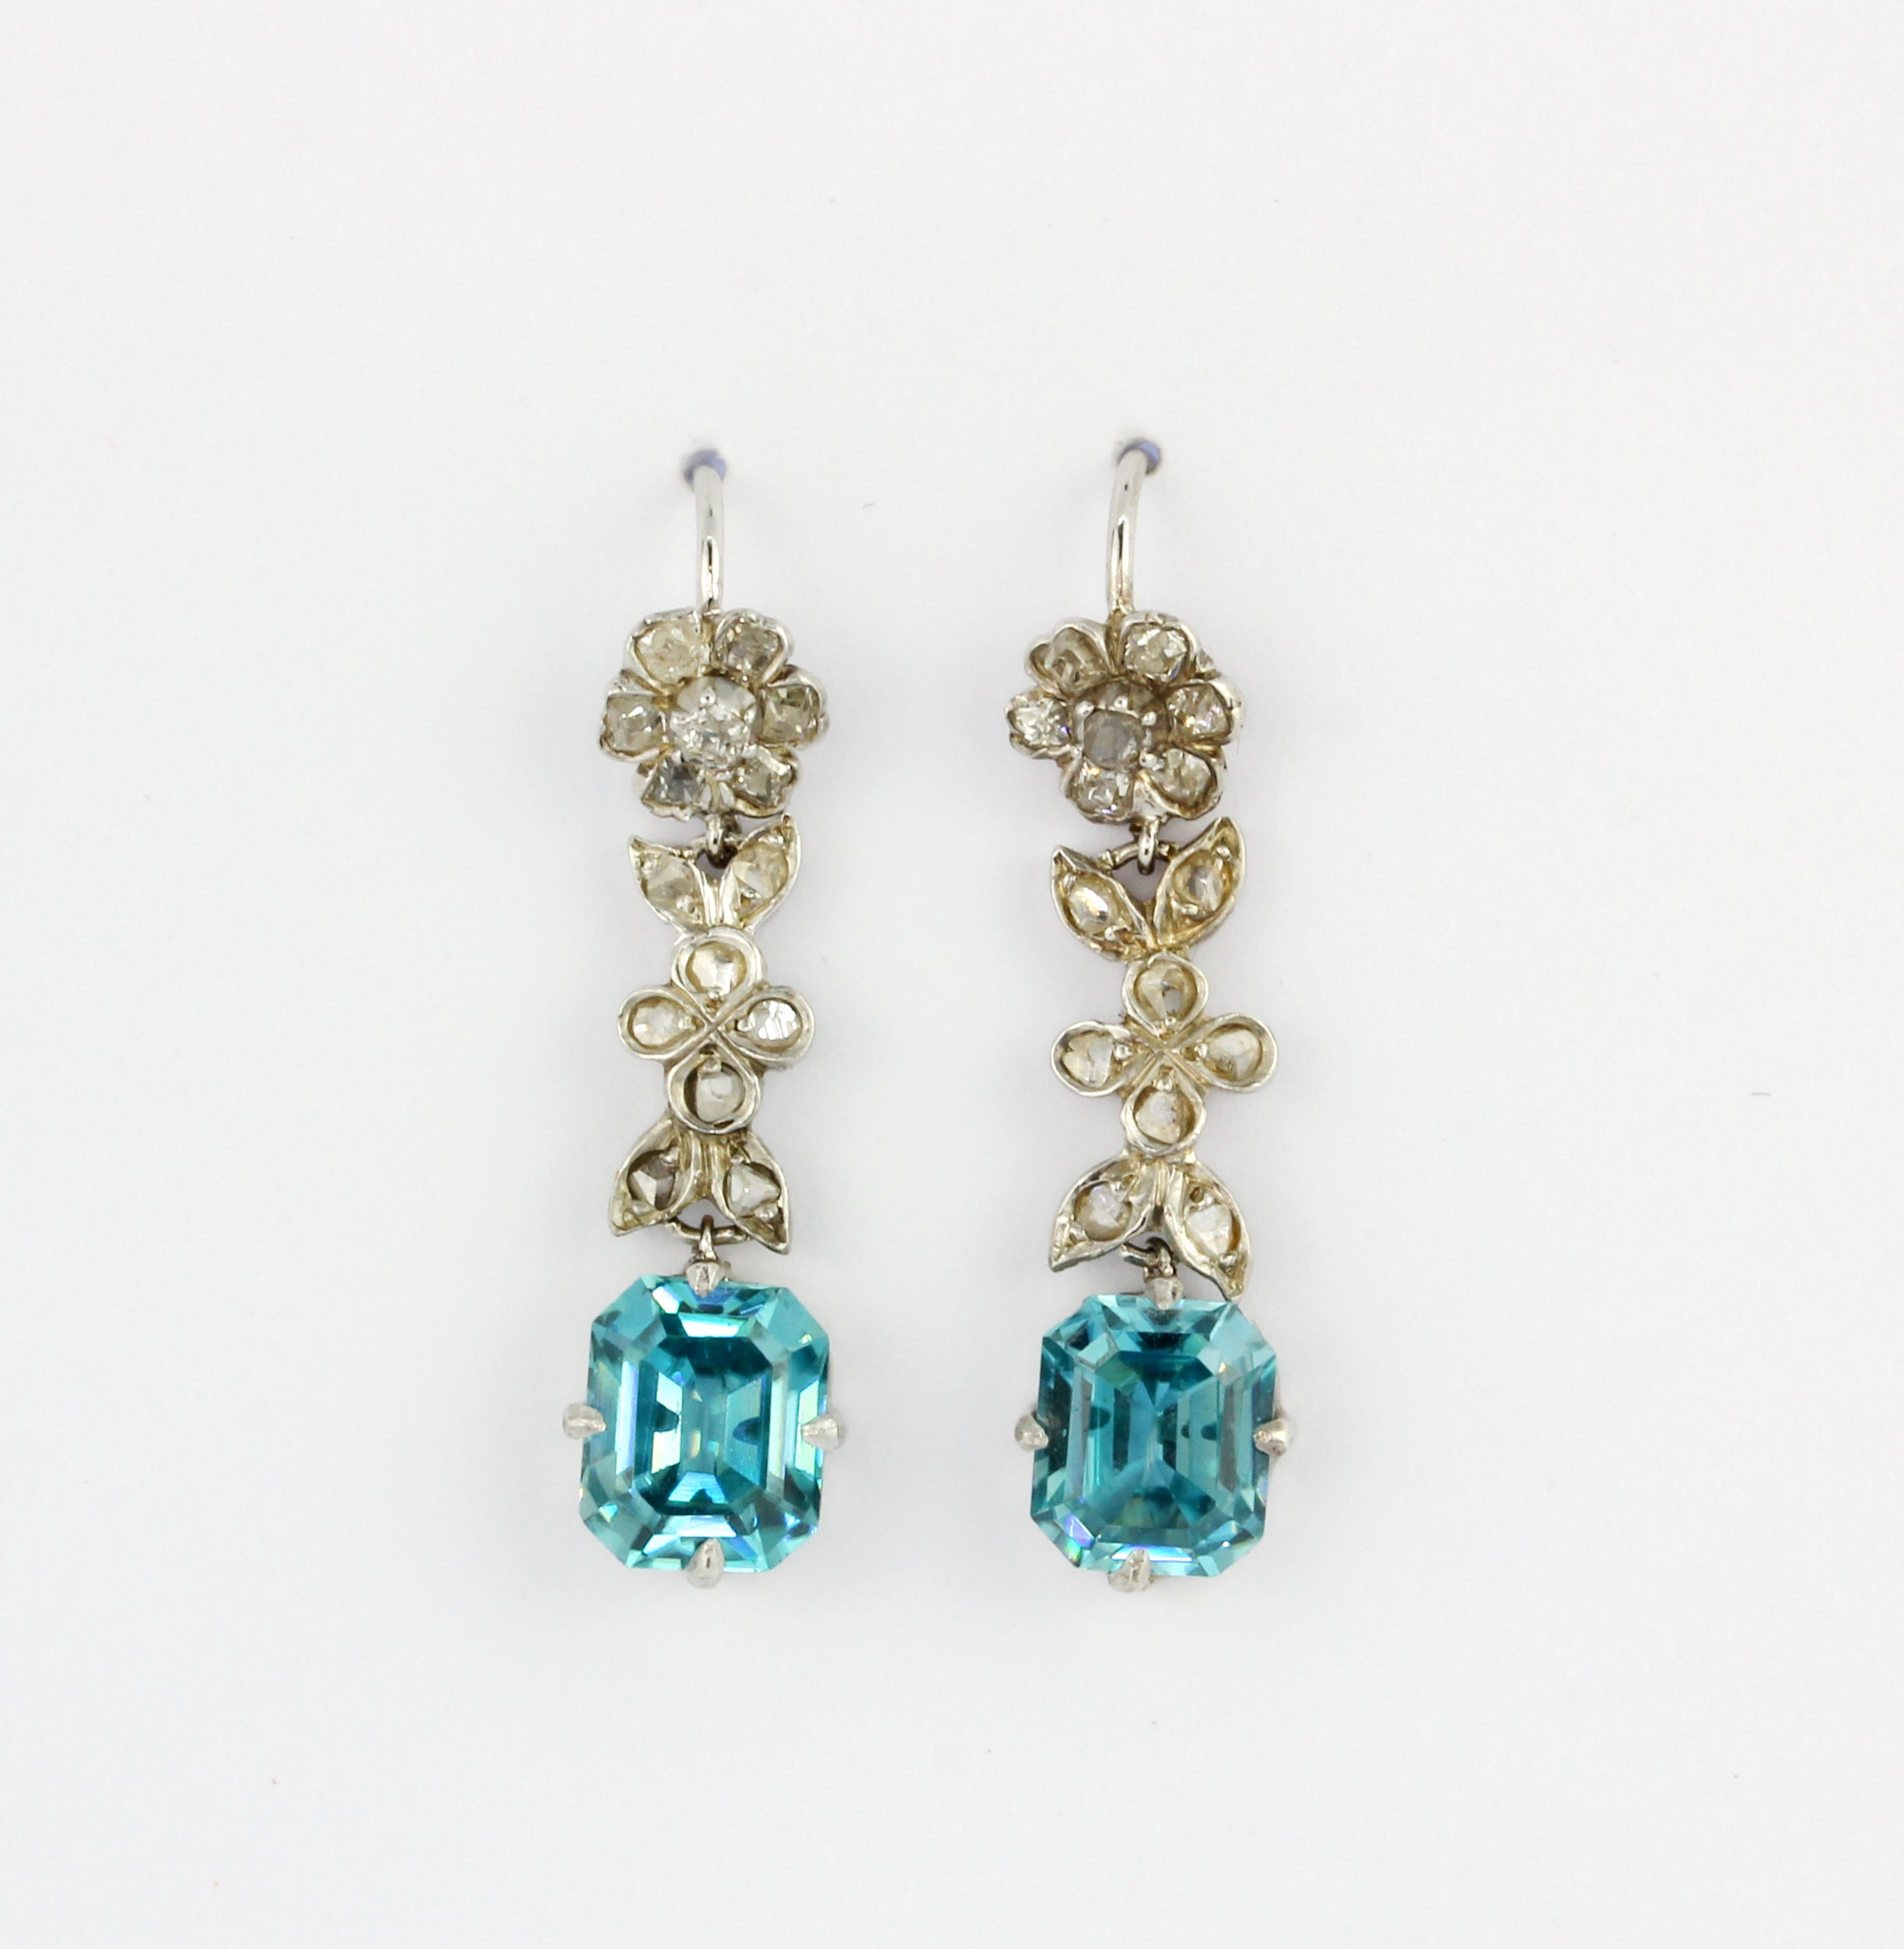 A pair of white metal (tested high carat gold) drop earrings set with emerald cut natural blue